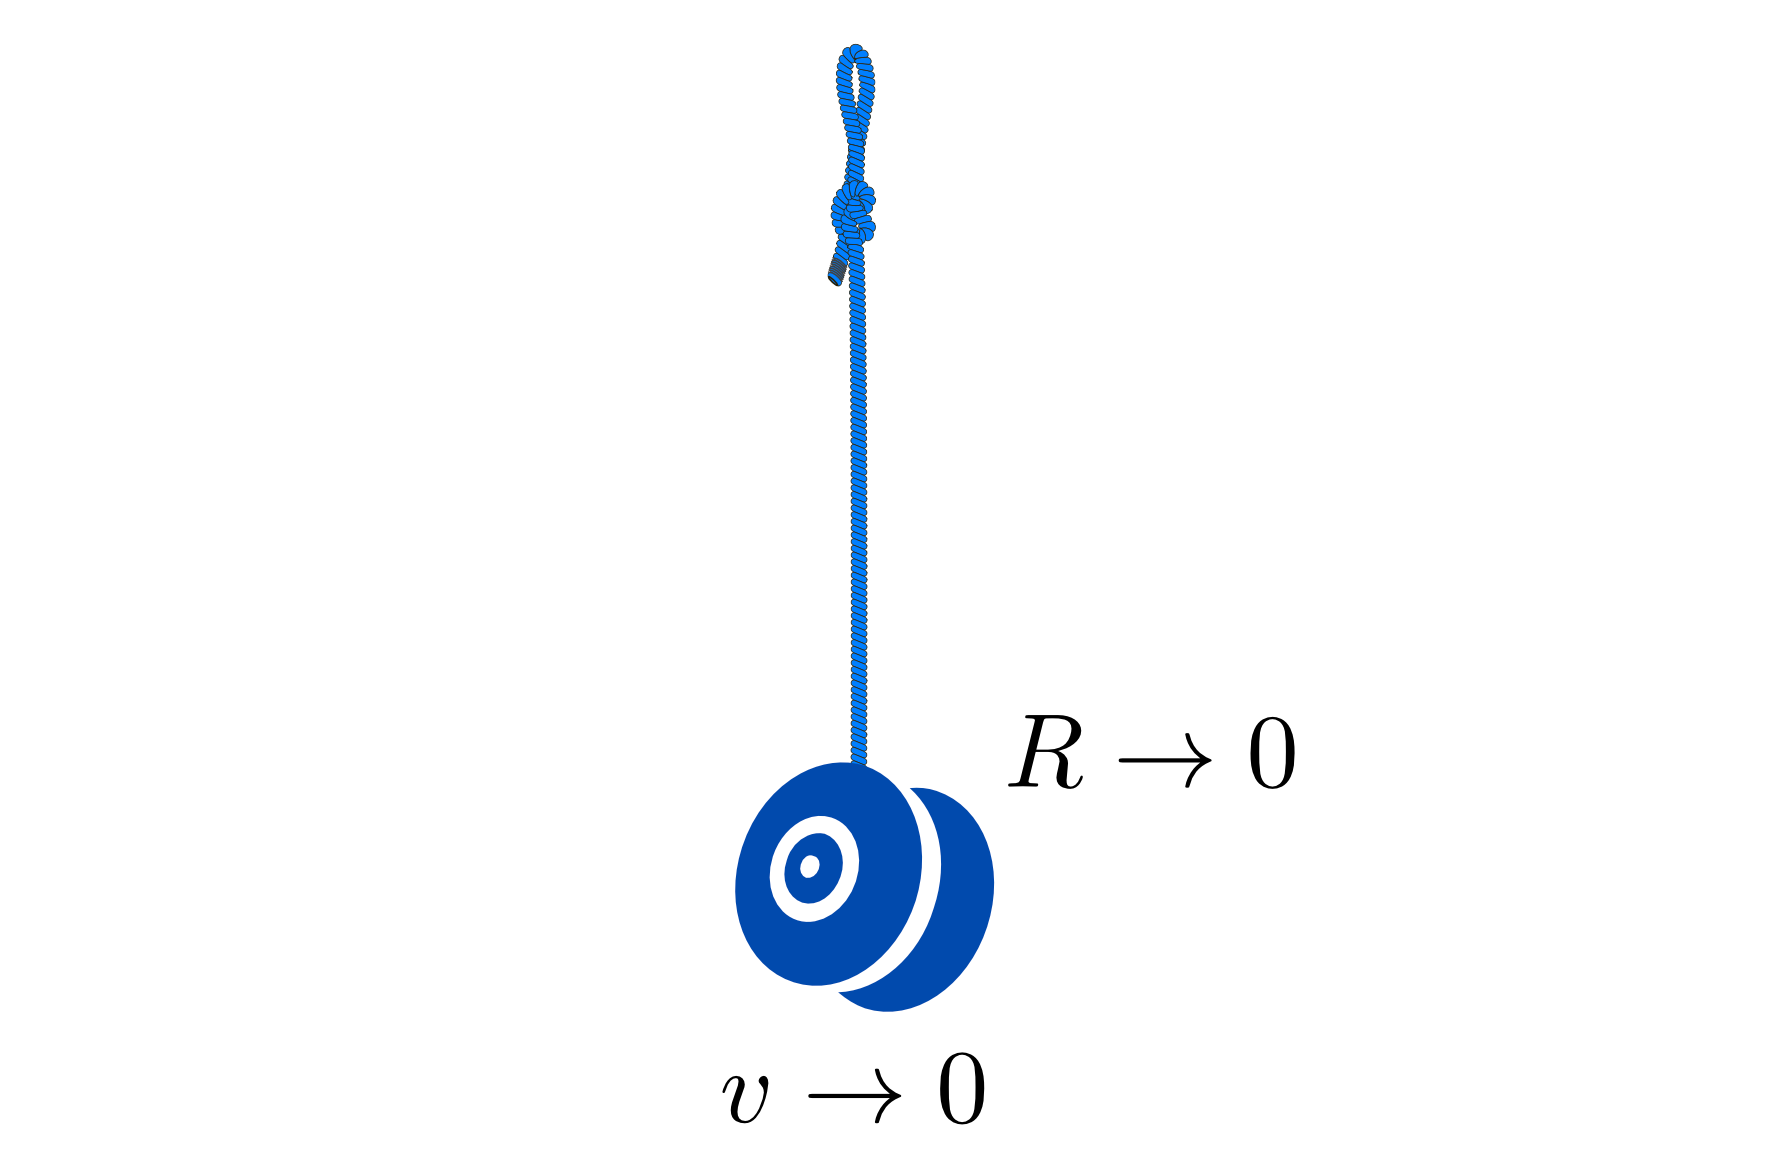 When the speed of the yoyo goes to zero, the radius of the circle should vanish as well